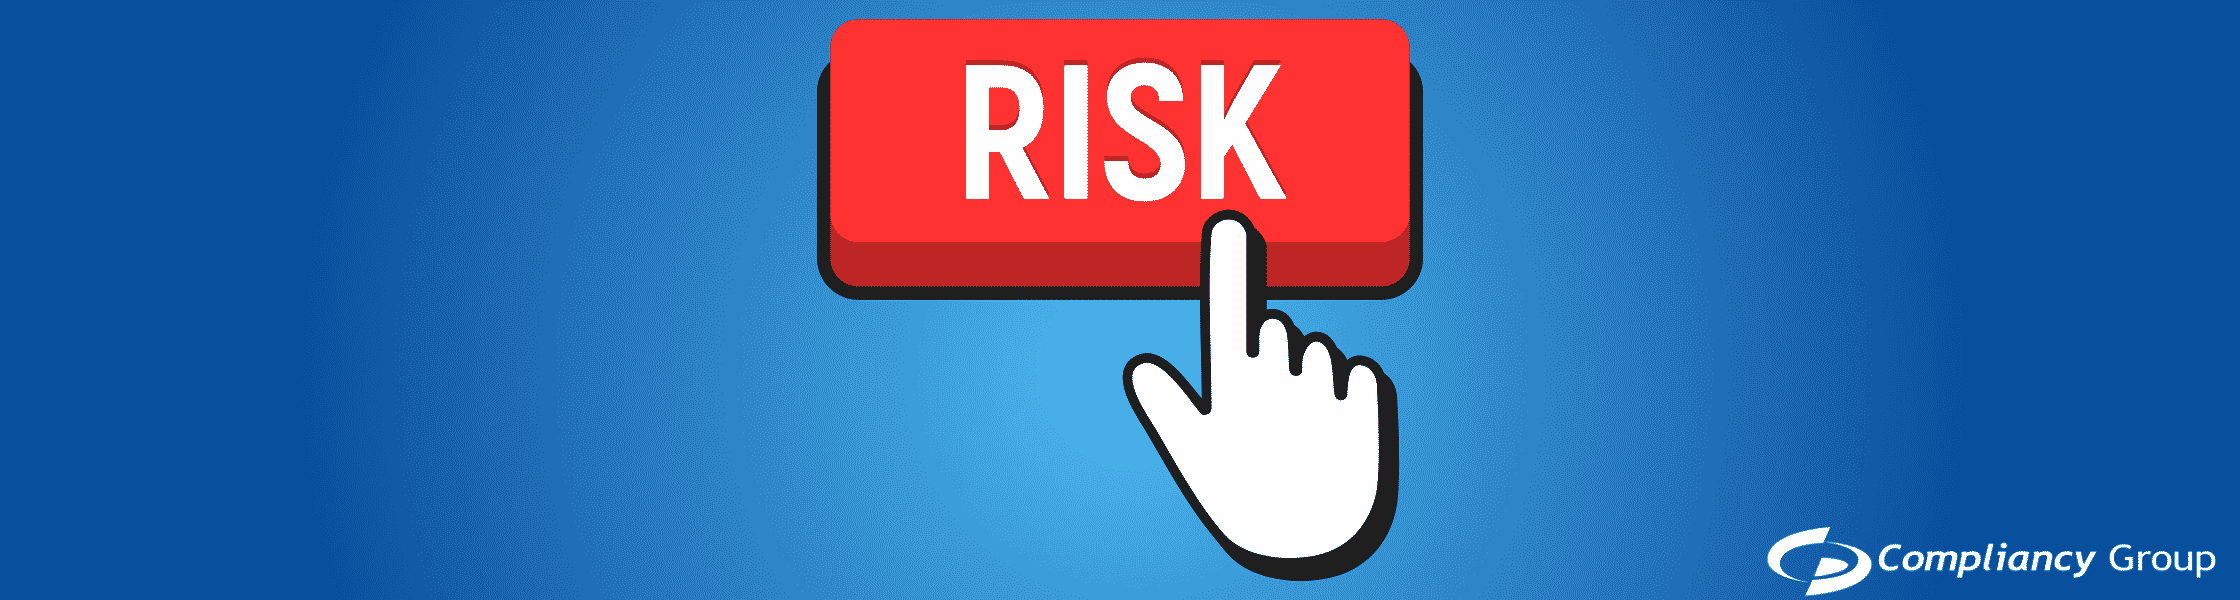 Determining the Level of Risk to ePHI